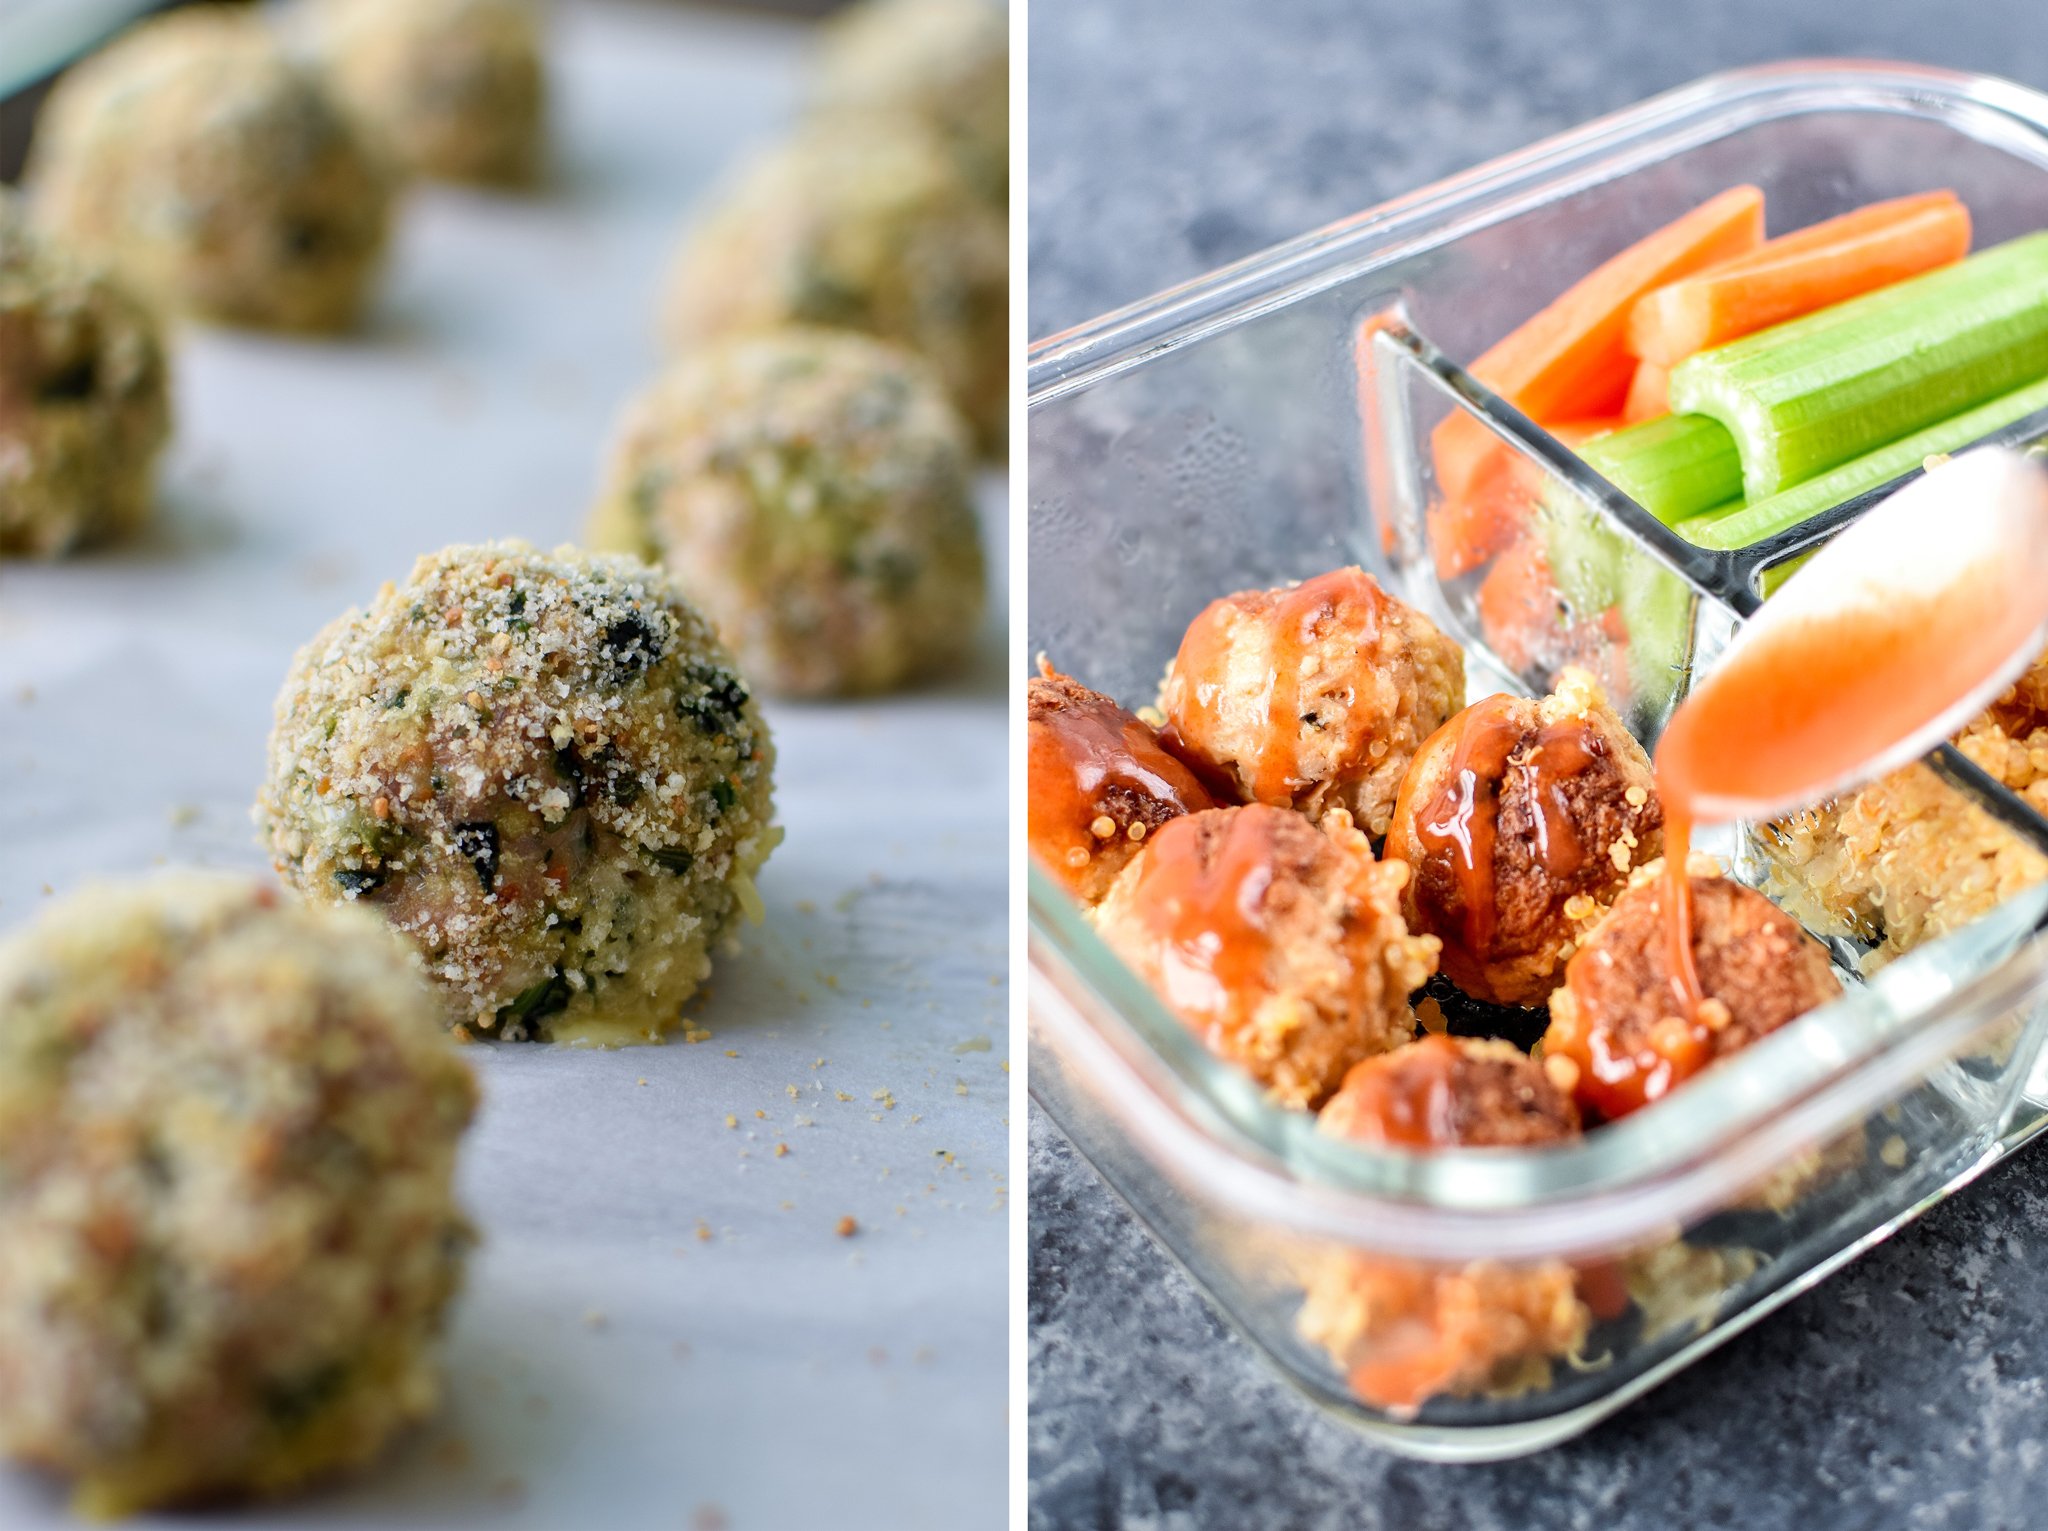 Spinach turkey meatballs on the left; buffalo chicken meatballs in a meal prep container on the right.